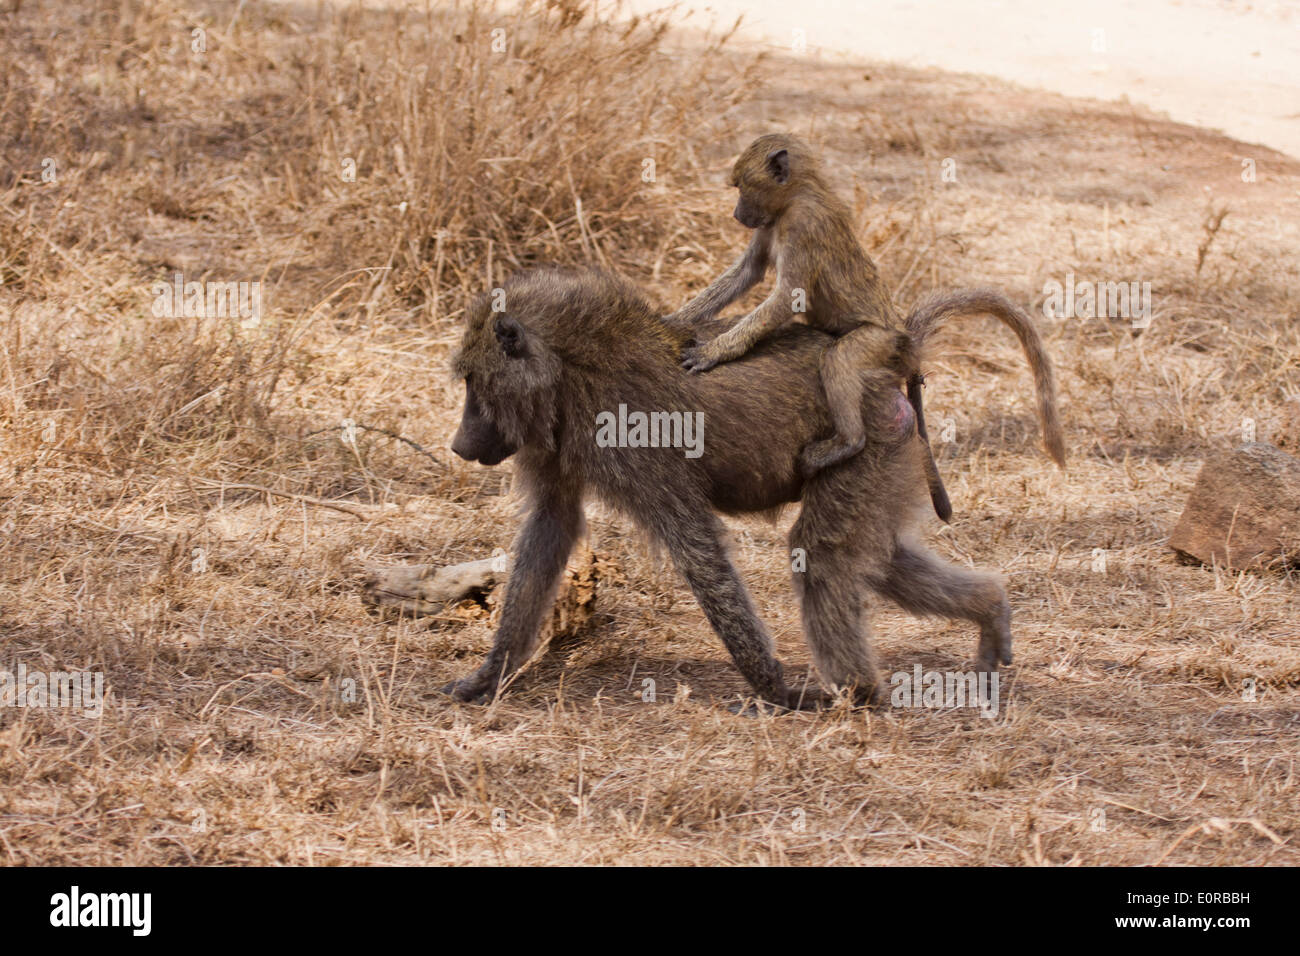 baby Olive baboon (Papio anubis). Photographed in Tanzania Stock Photo